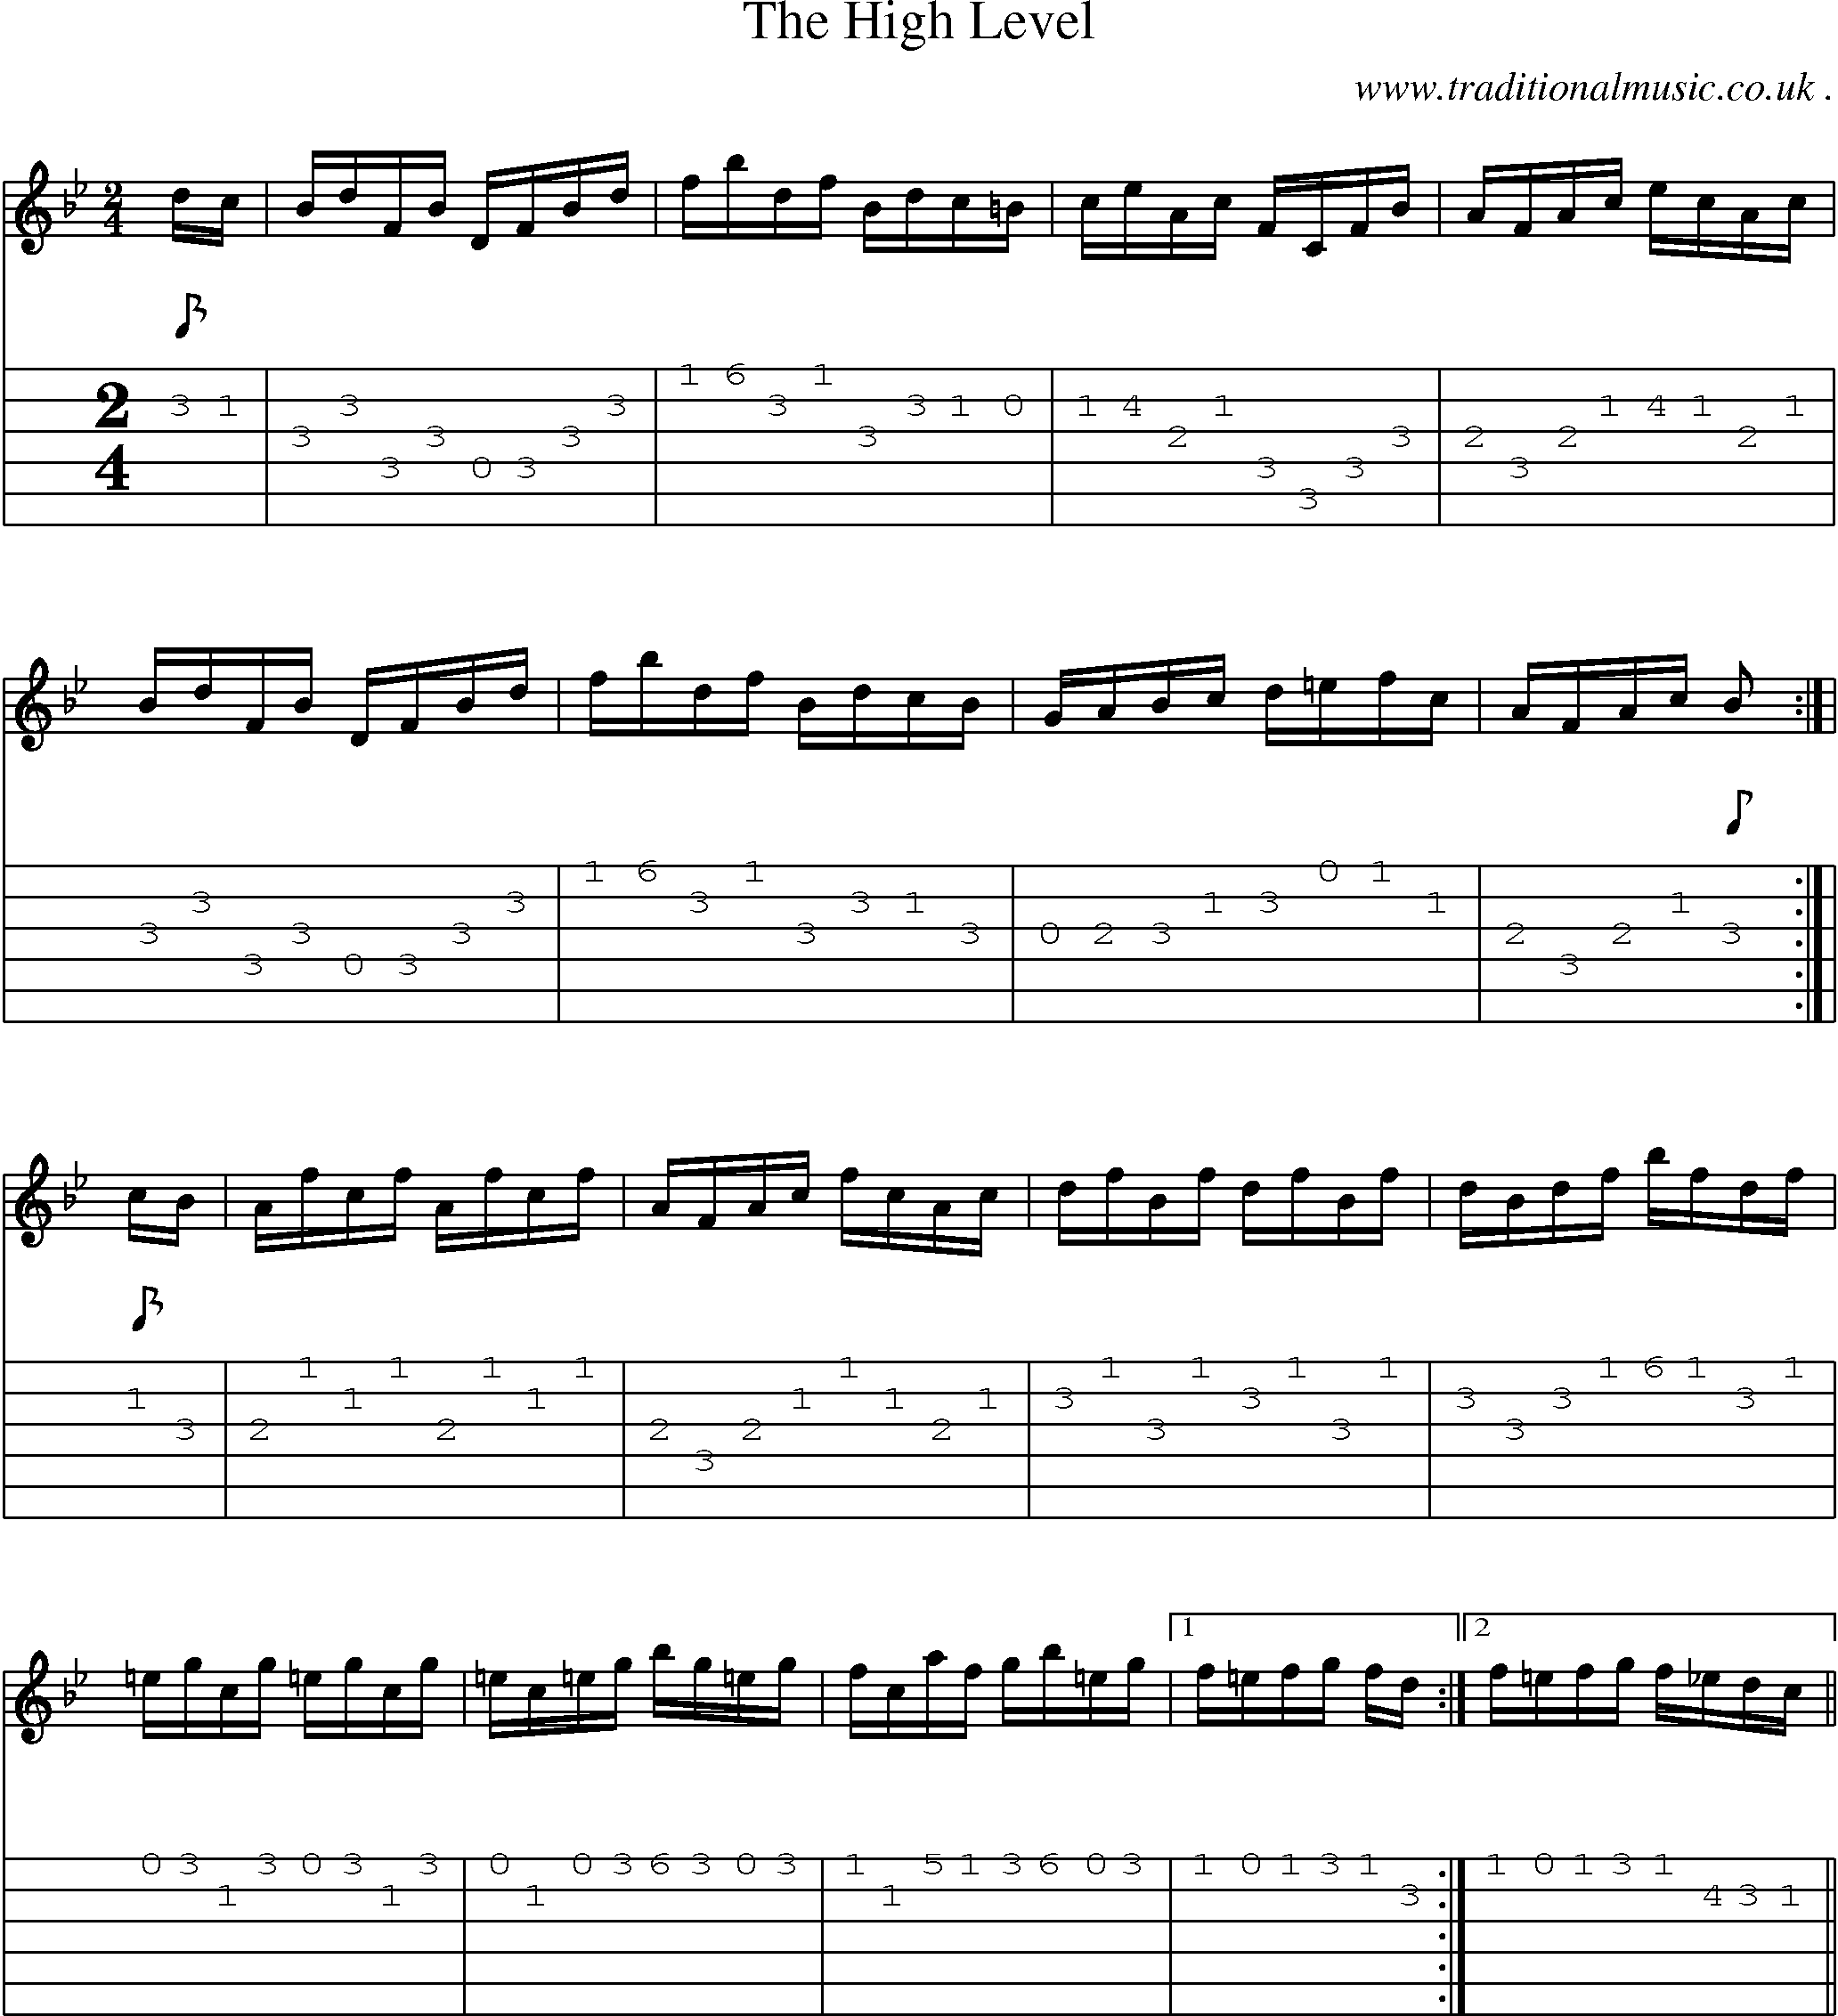 Music Score and Guitar Tabs for The High Level